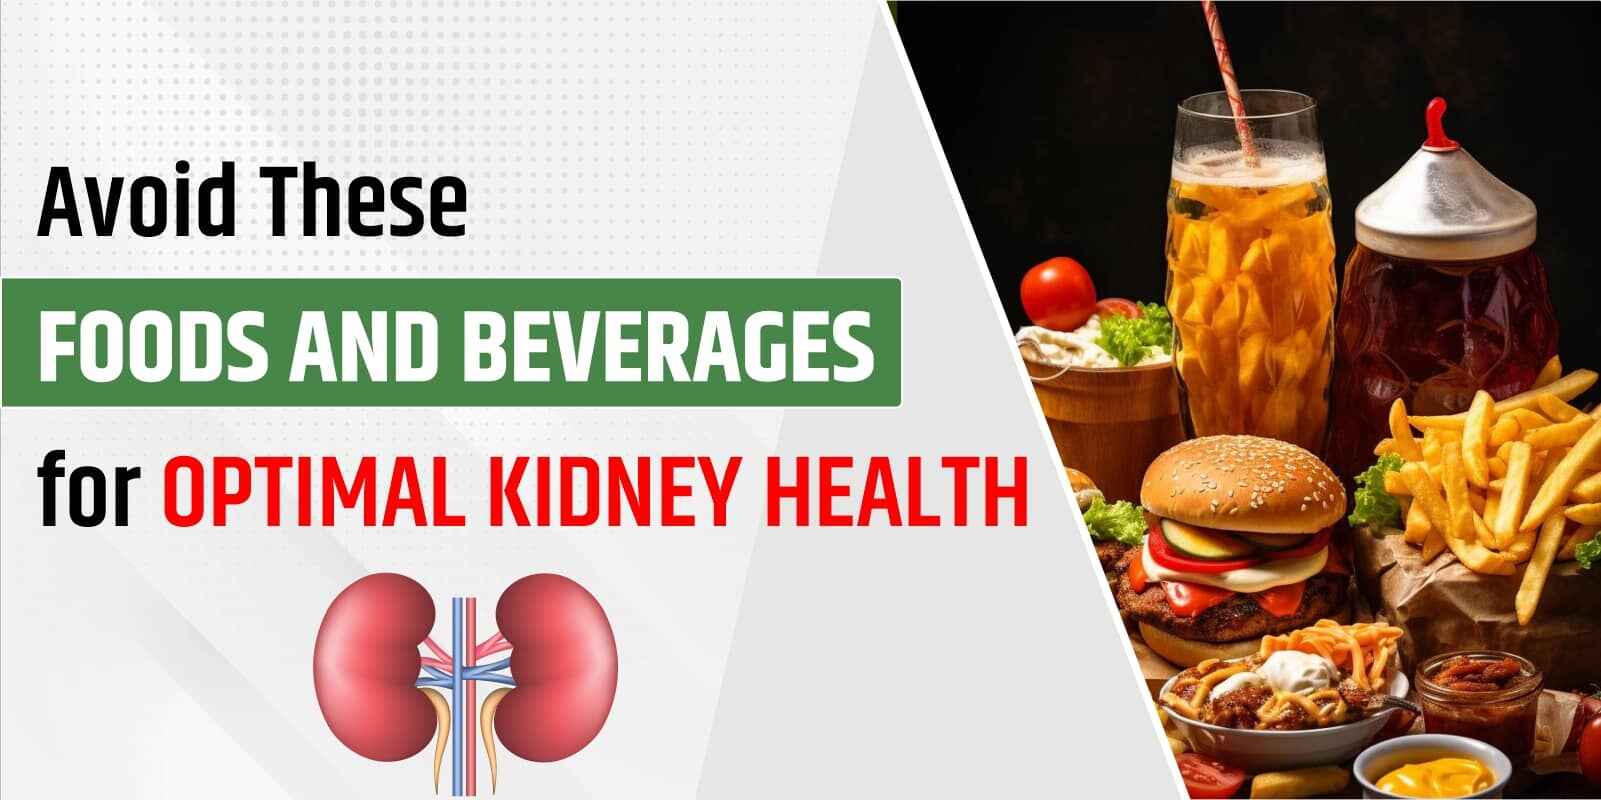 Avoid These Foods and Beverages for Optimal Kidney Health